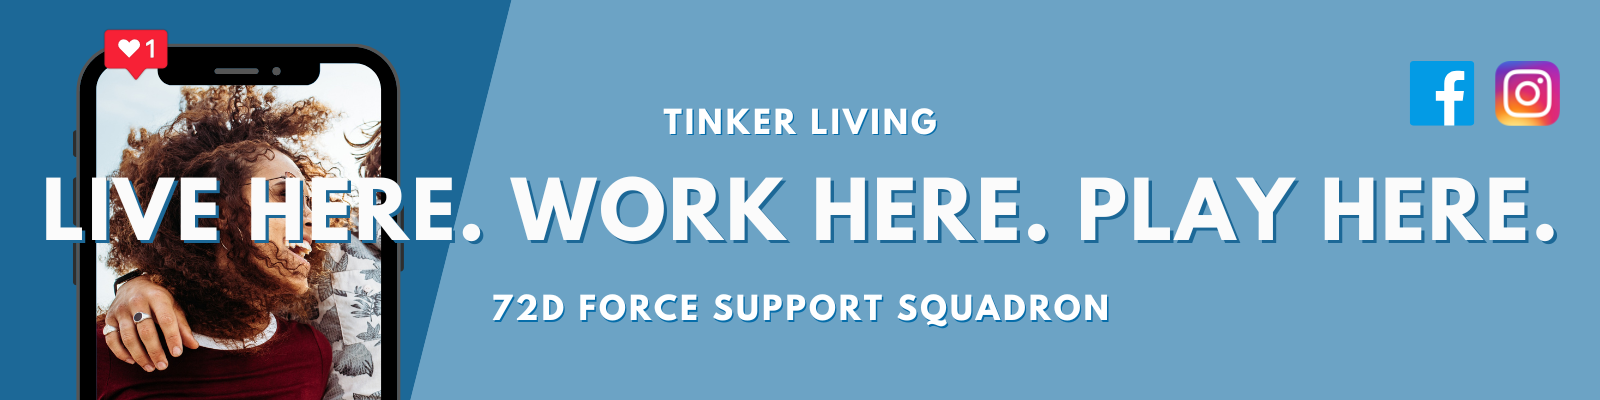 Link to Tinker Living